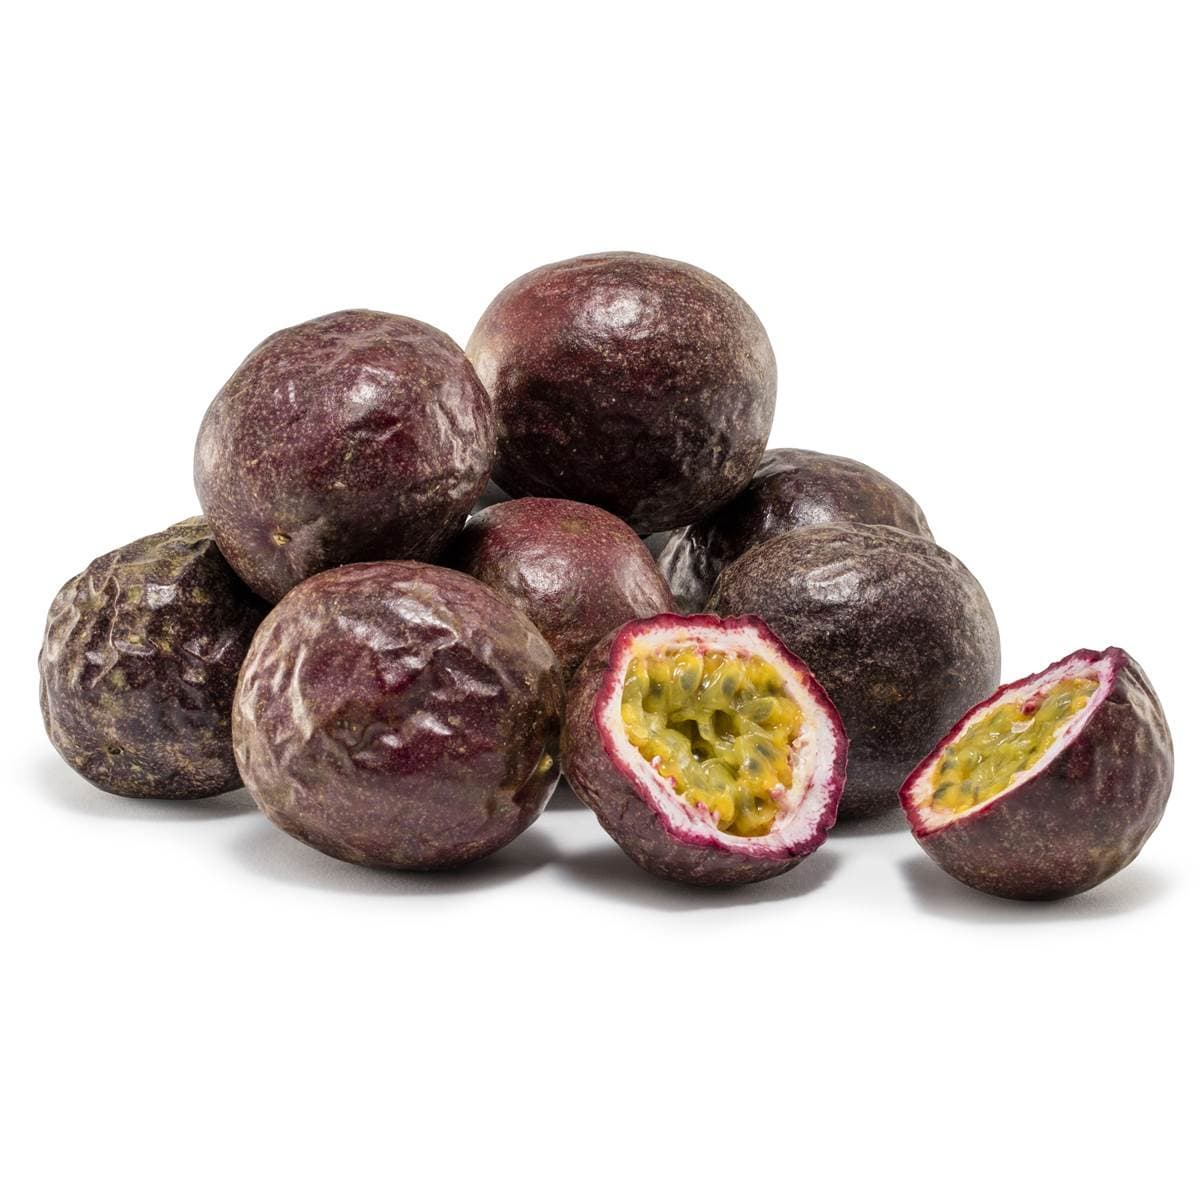 Pulp and seeds of purple skinned passionfruit_